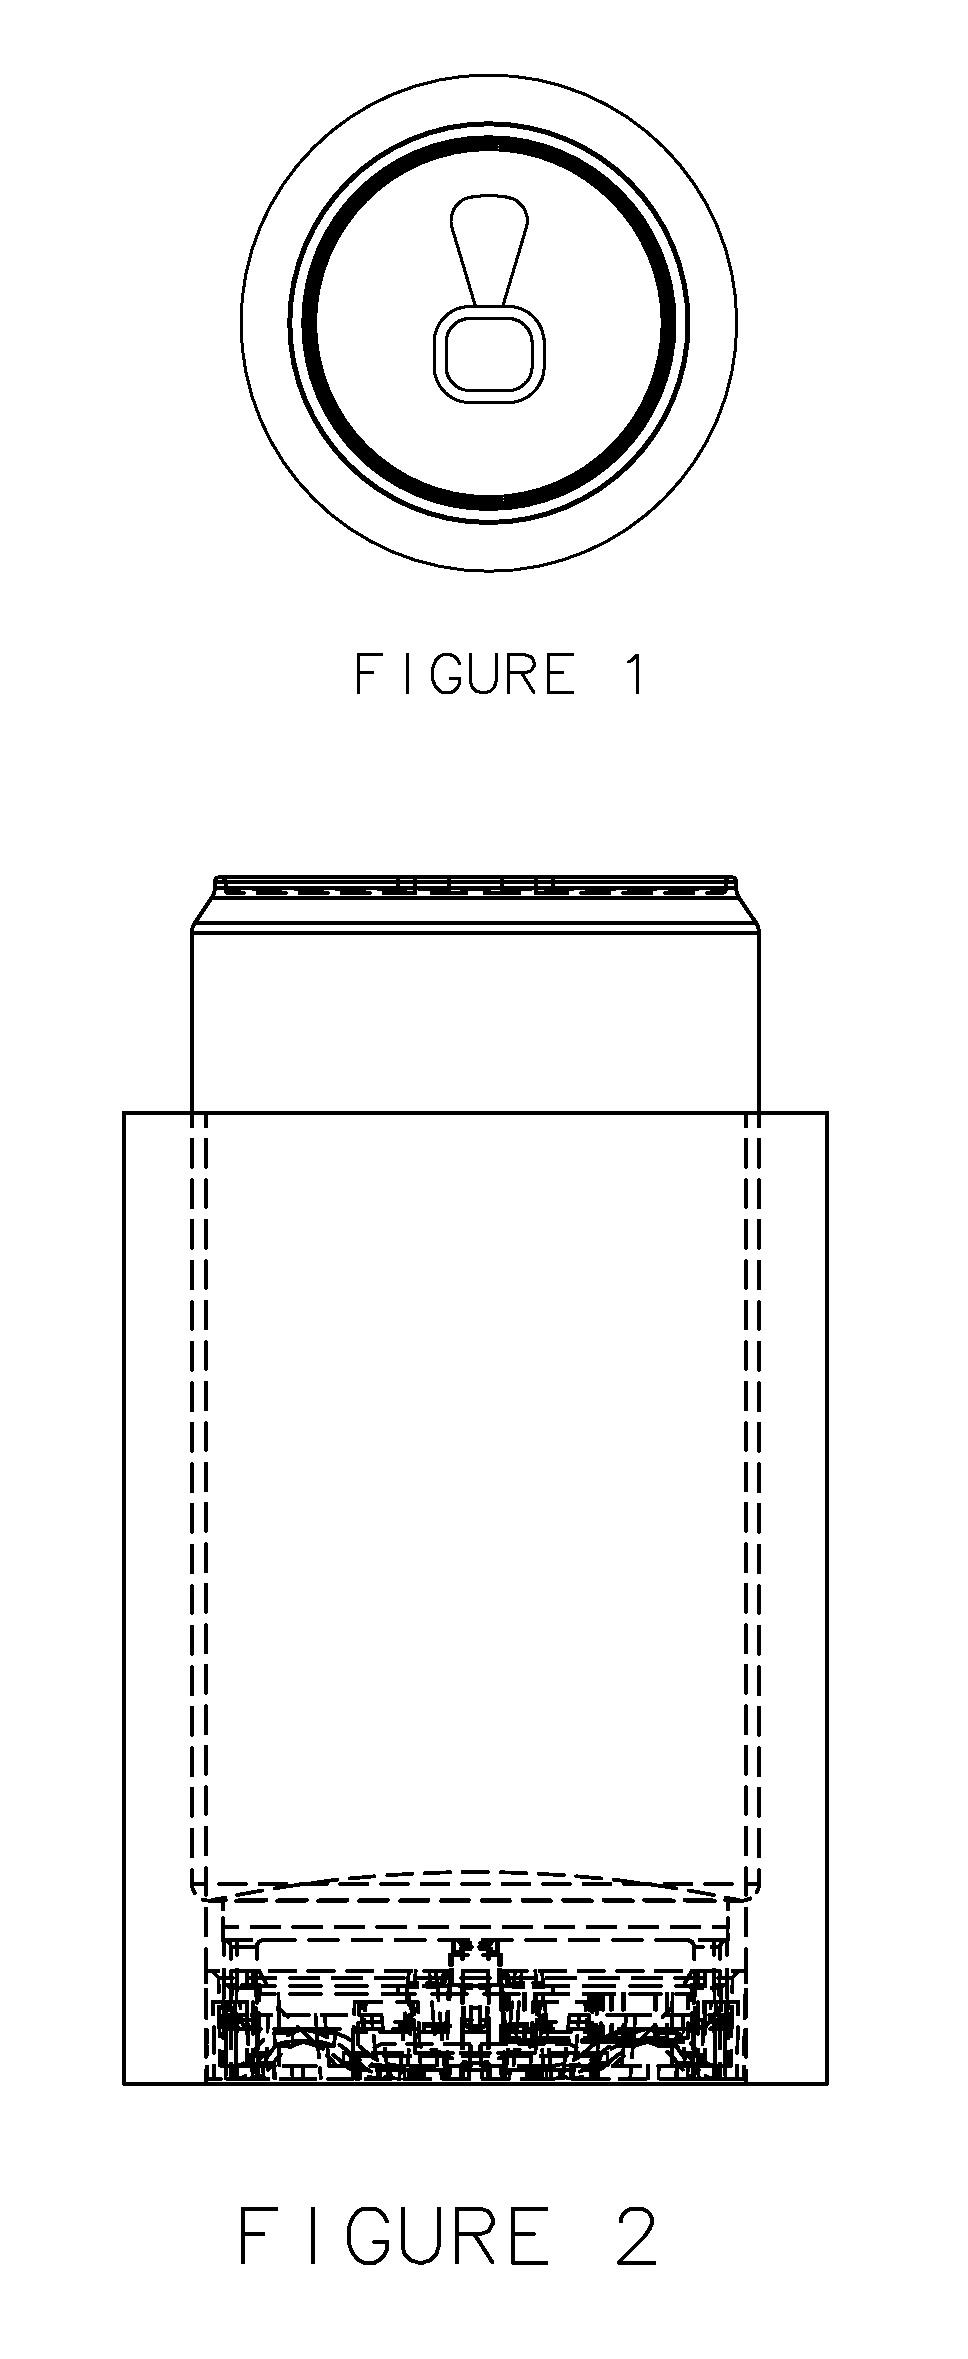 Beverage can cooler with sound device in bottom